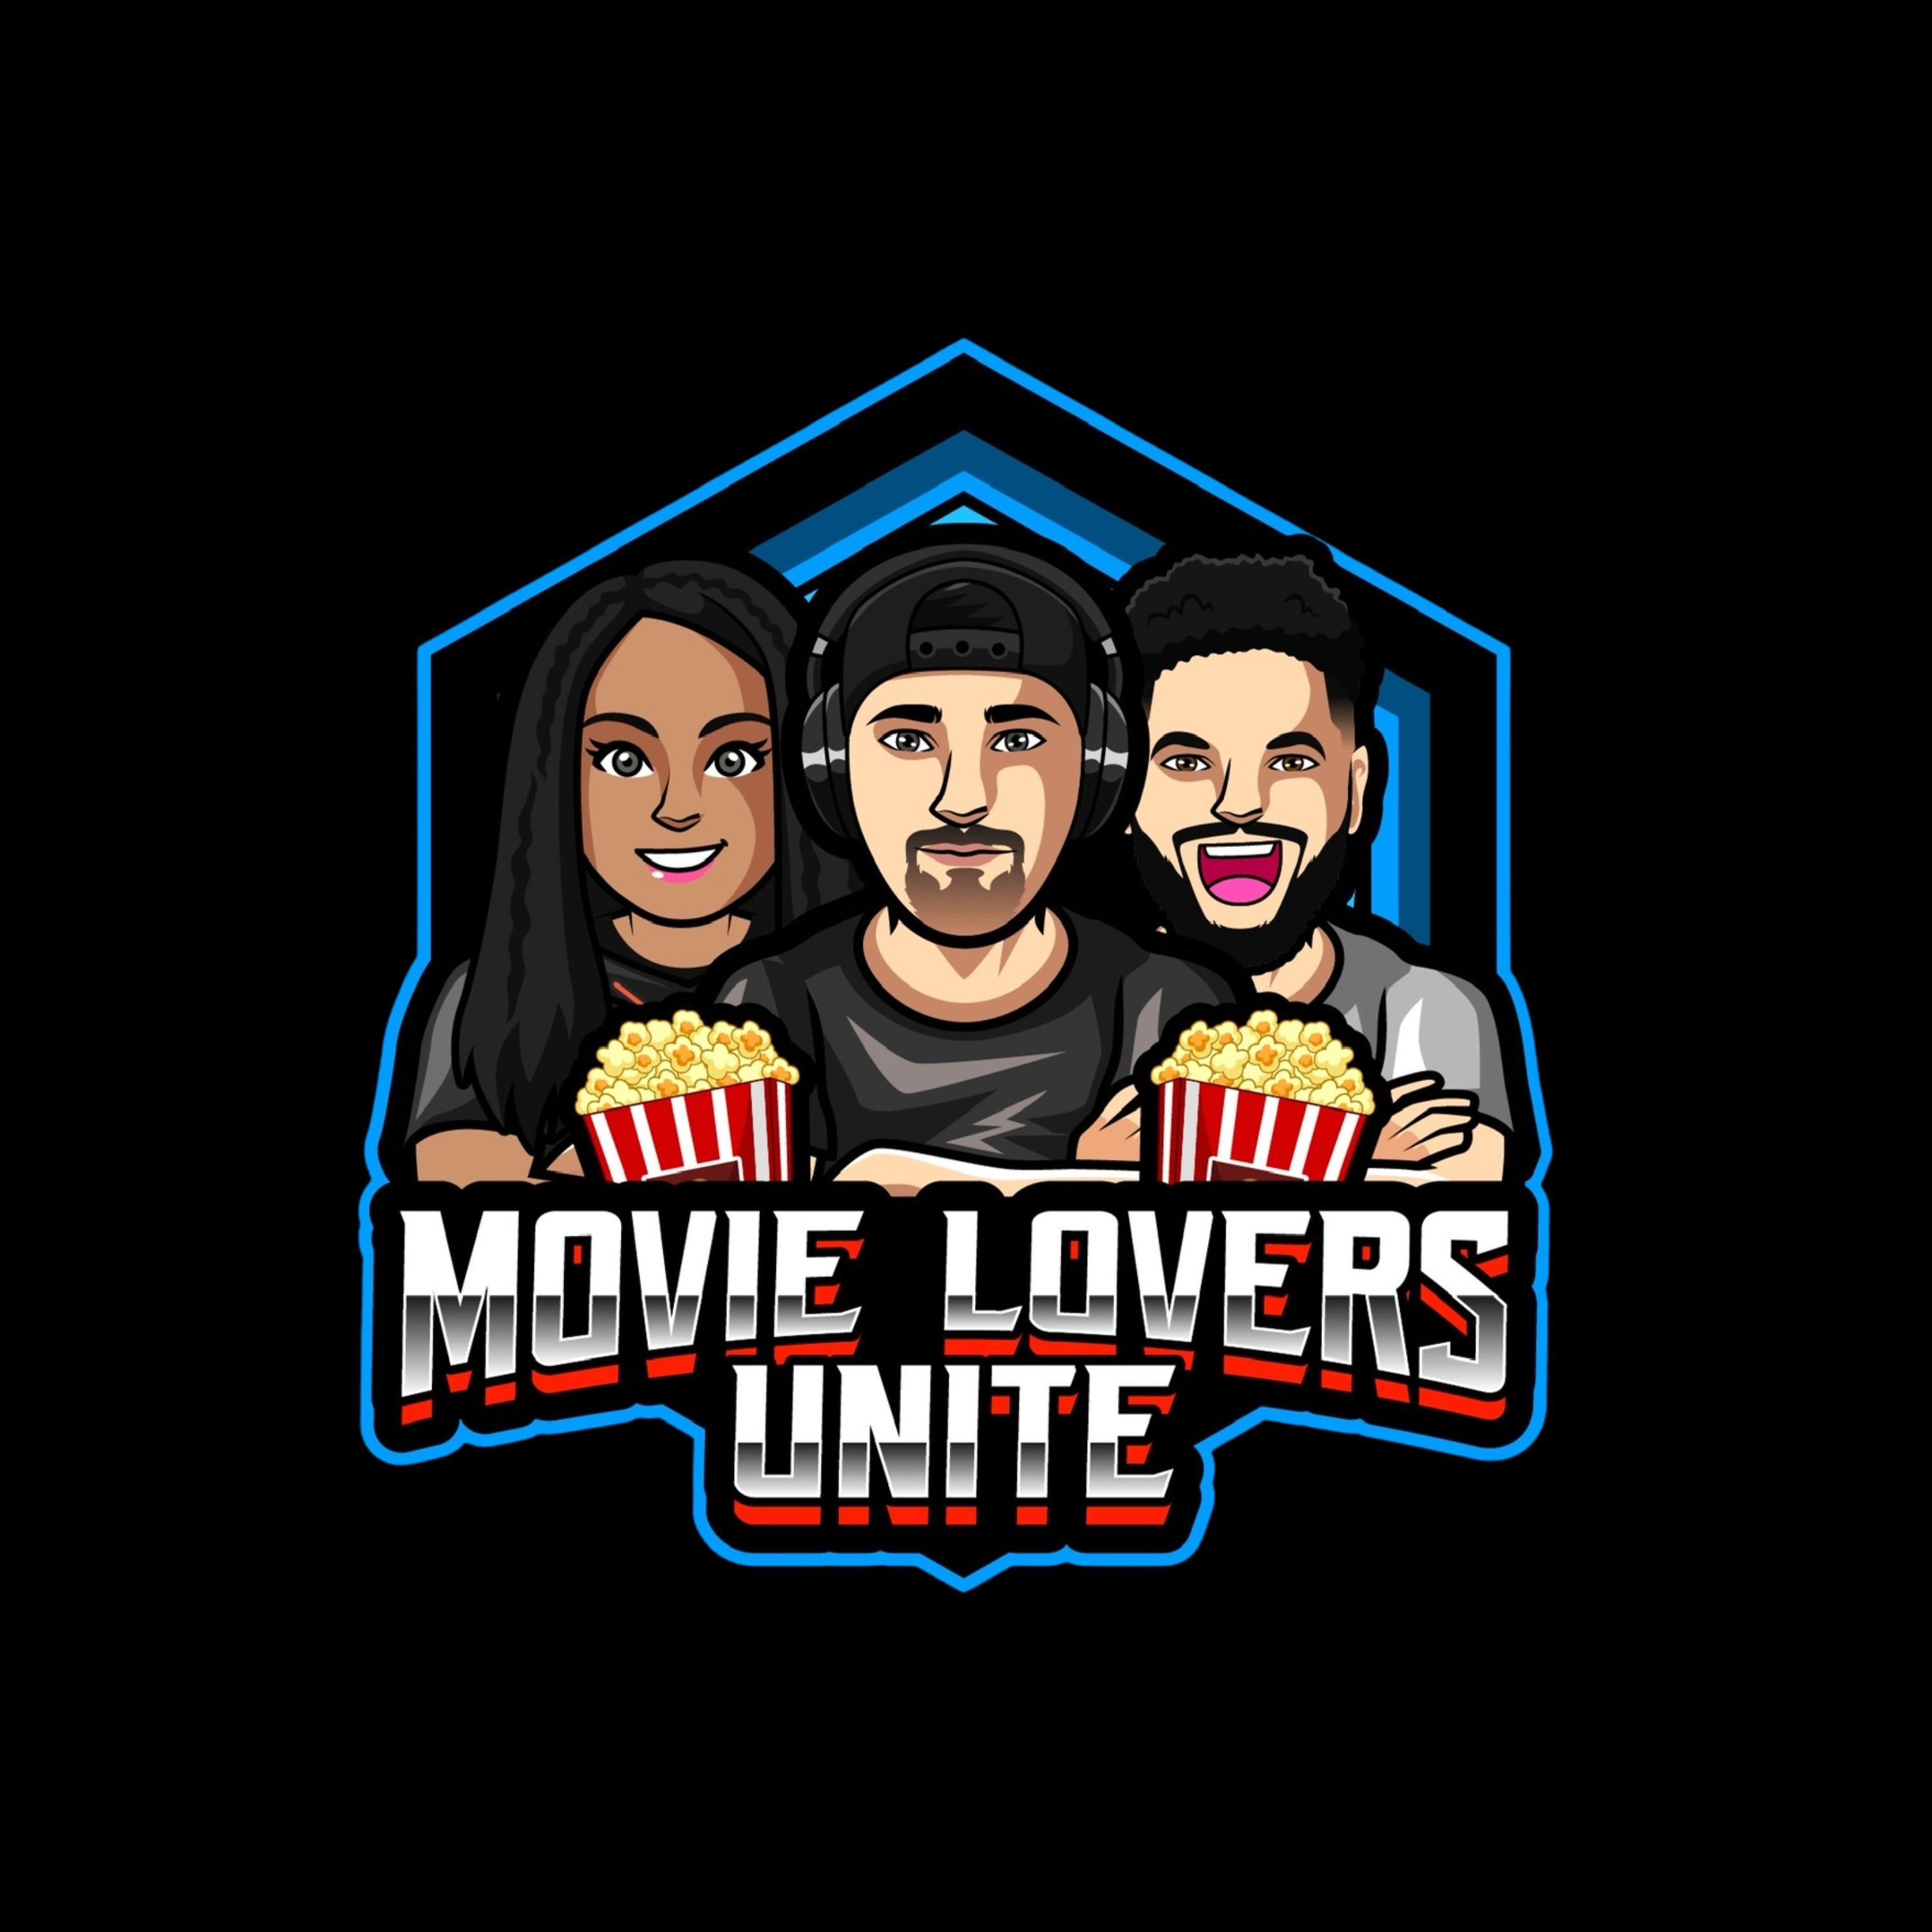 To & owo VOD 1/2021 Witcher, Squid Game, The Boys - MOVIES